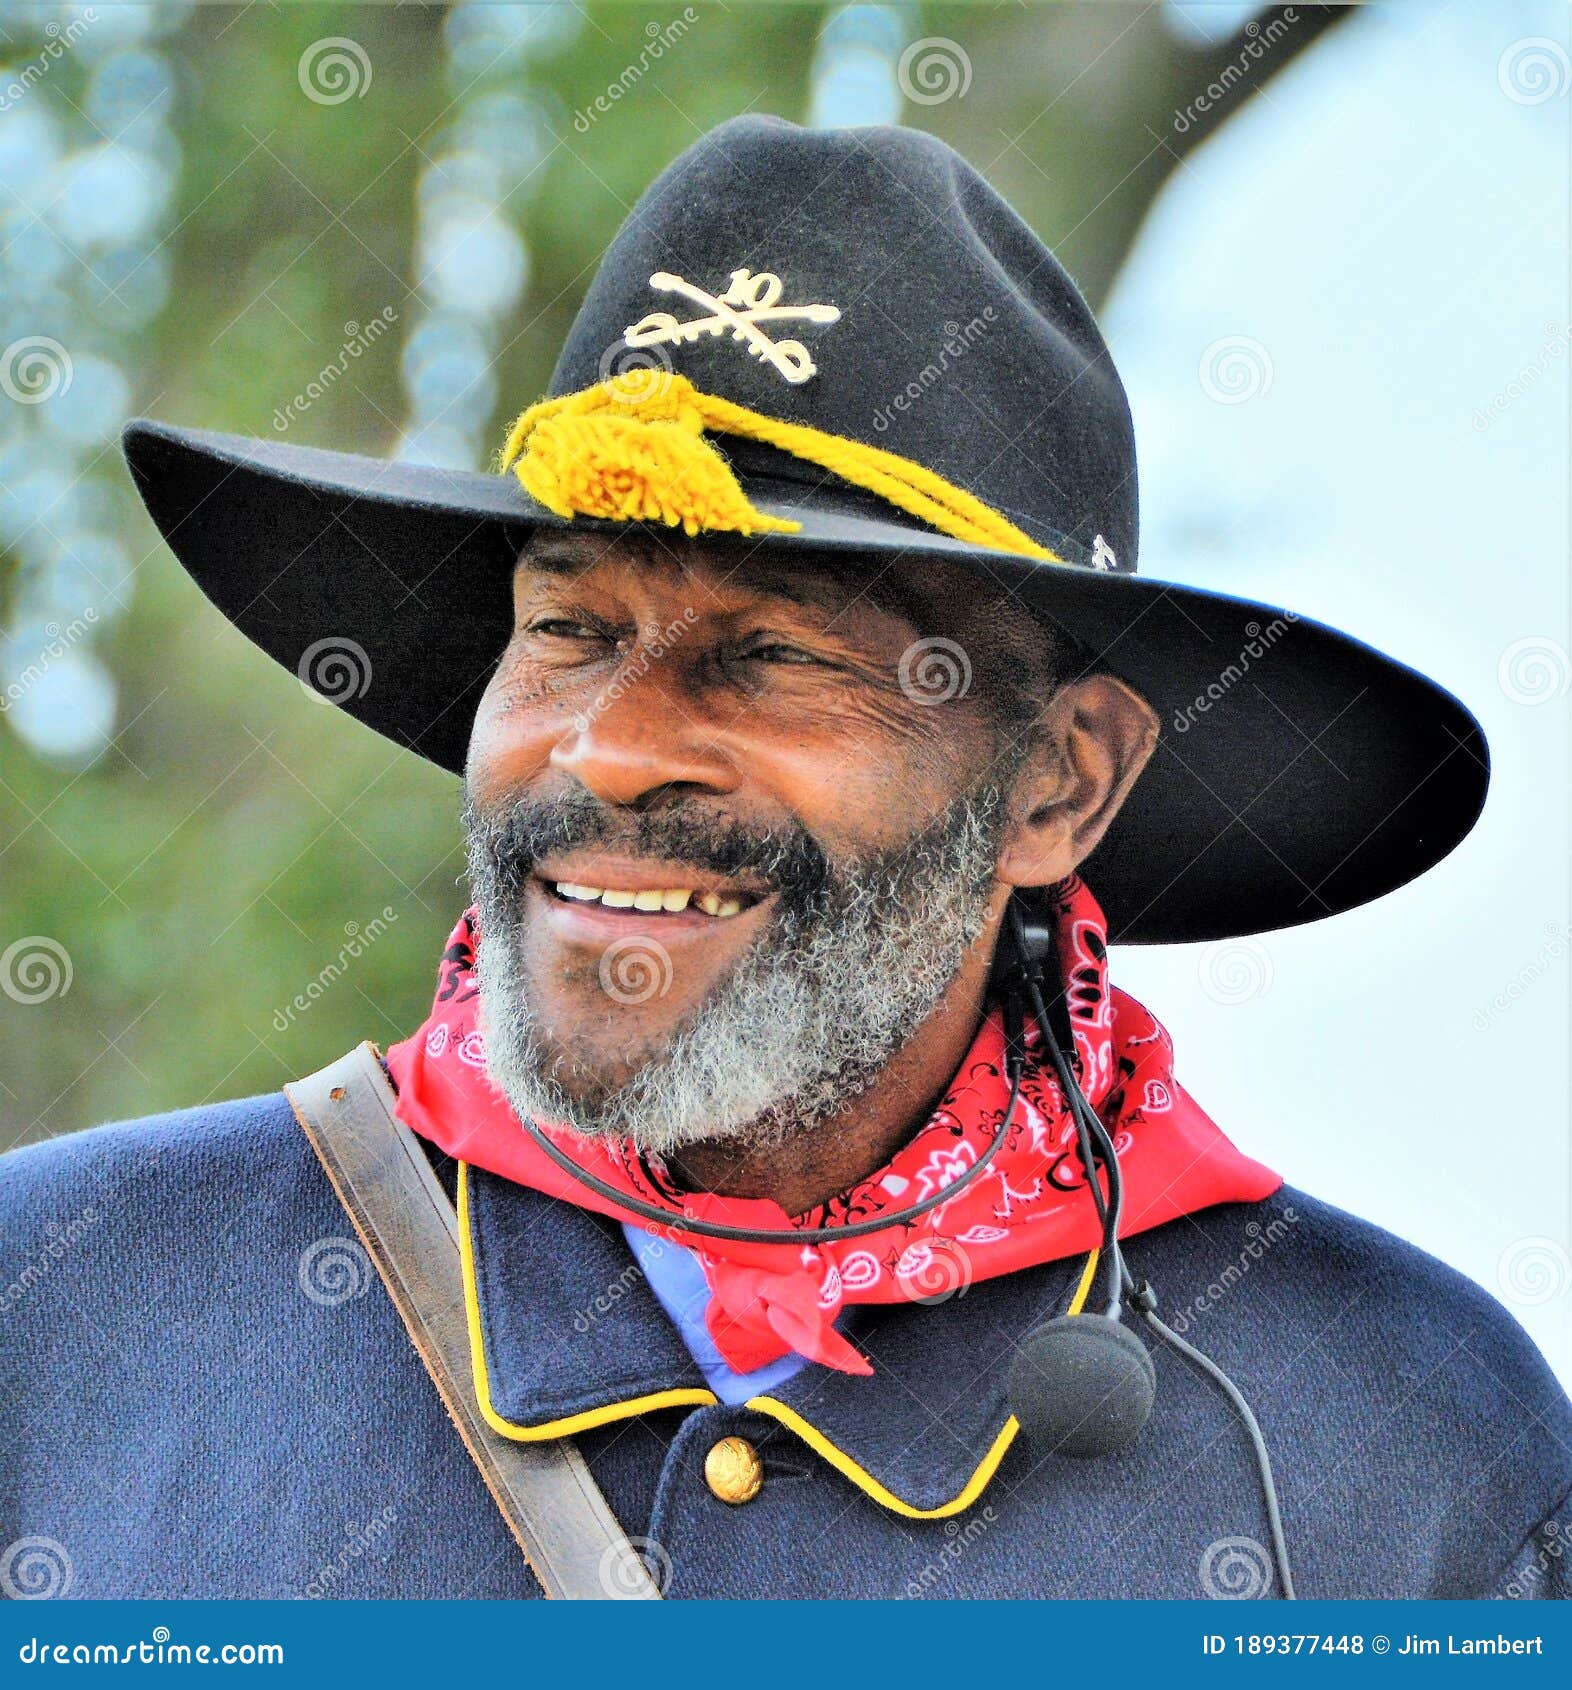 Buffalo Soldiers Precision Riding Editorial Stock Photo Image of cavalry: